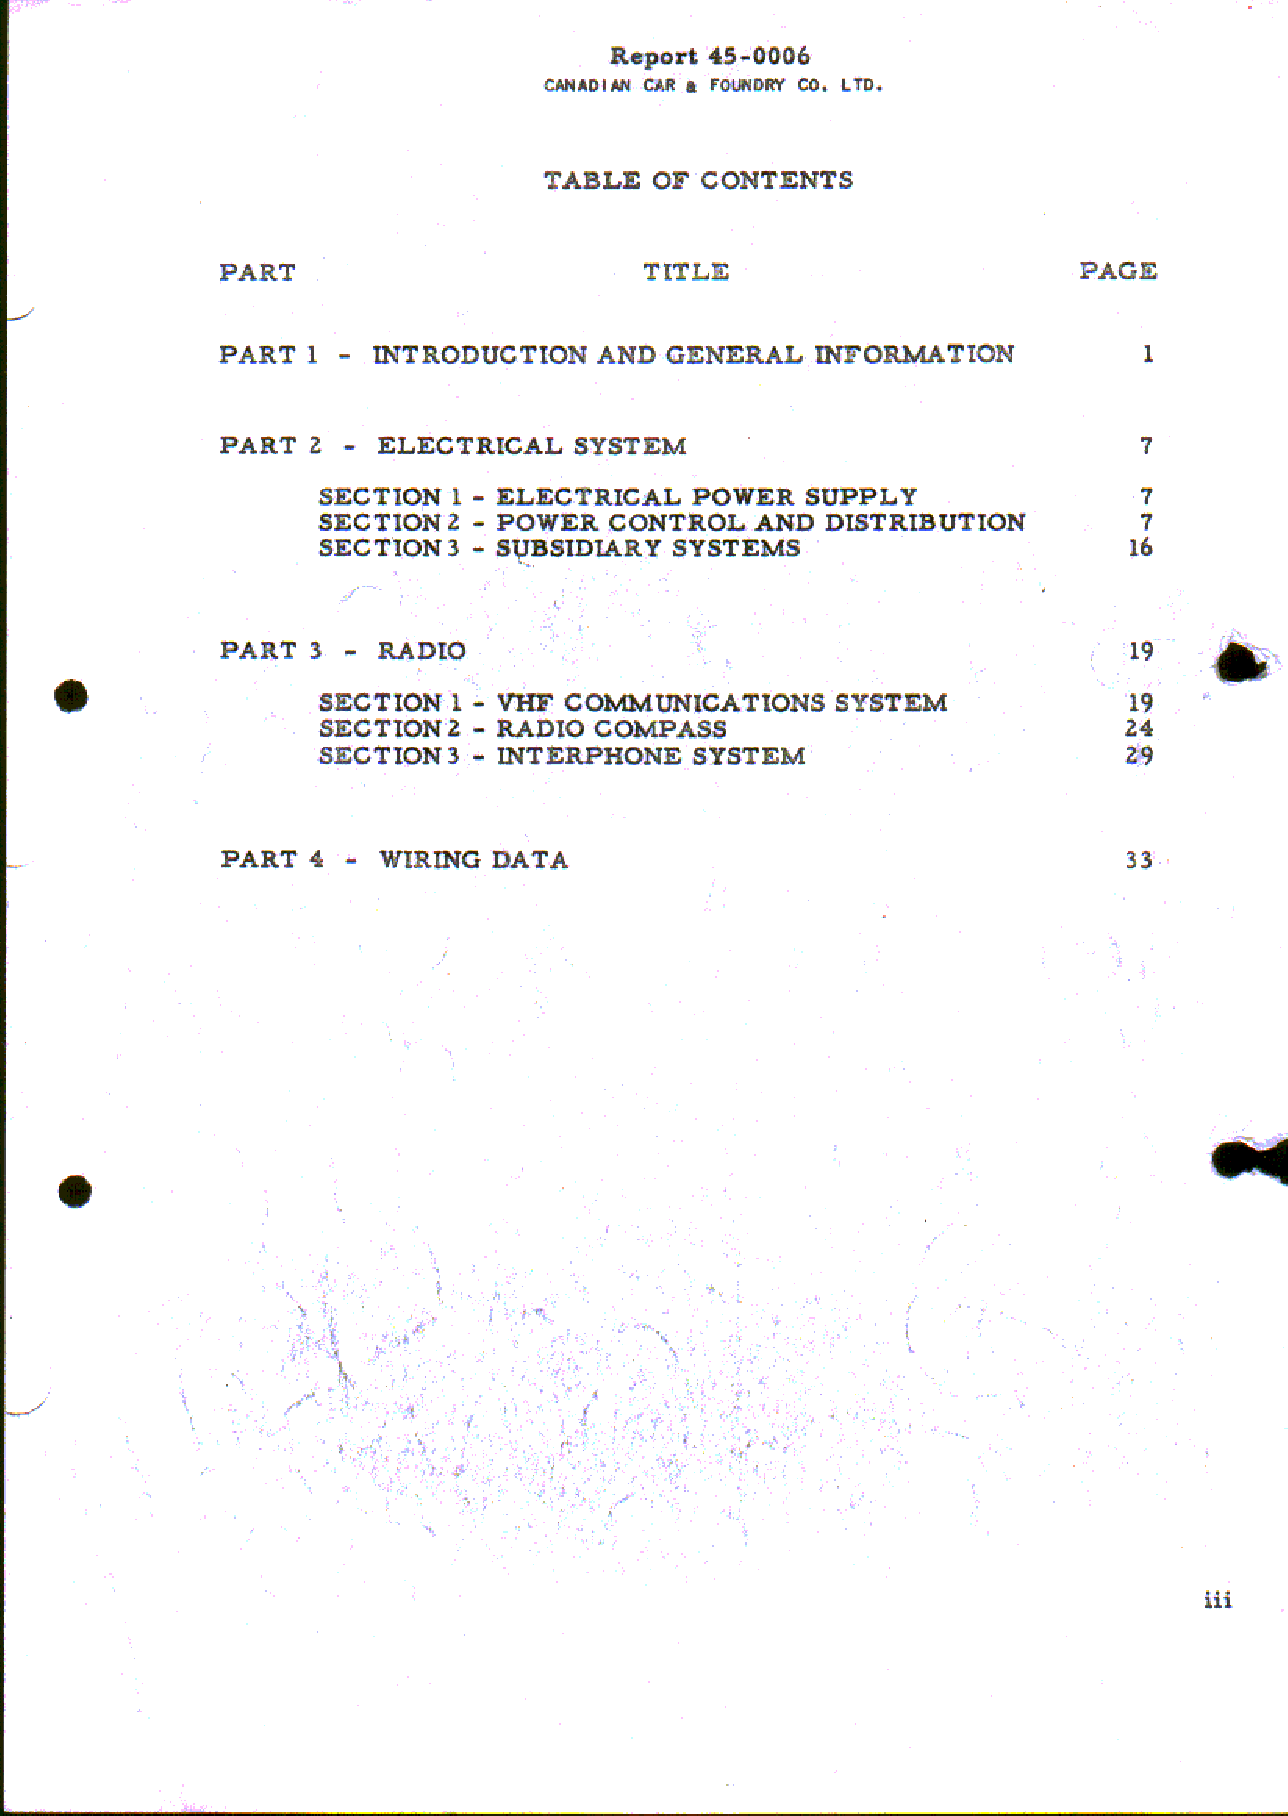 Sample page 11 from AirCorps Library document: Description and Maintenance Instructions for Harvard 2, 2A, and 4